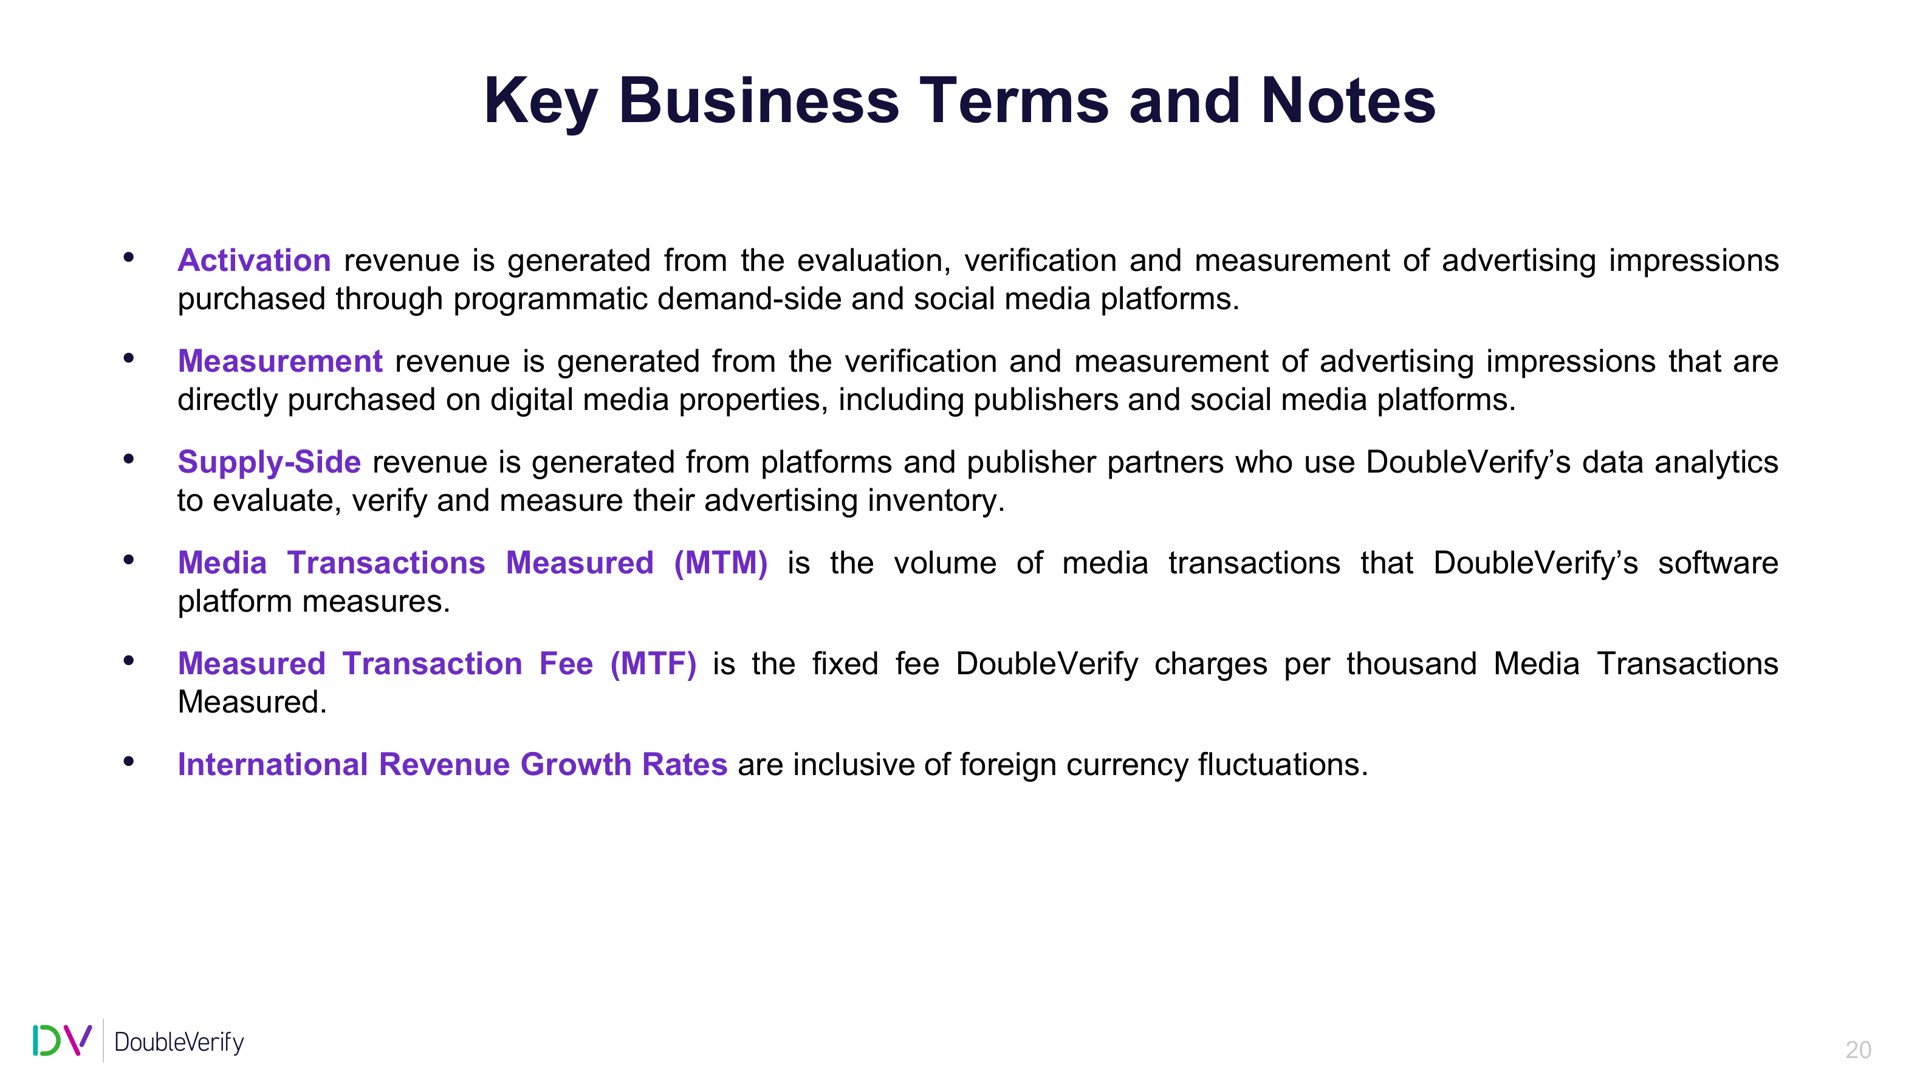 key business terms and notes | DoubleVerify